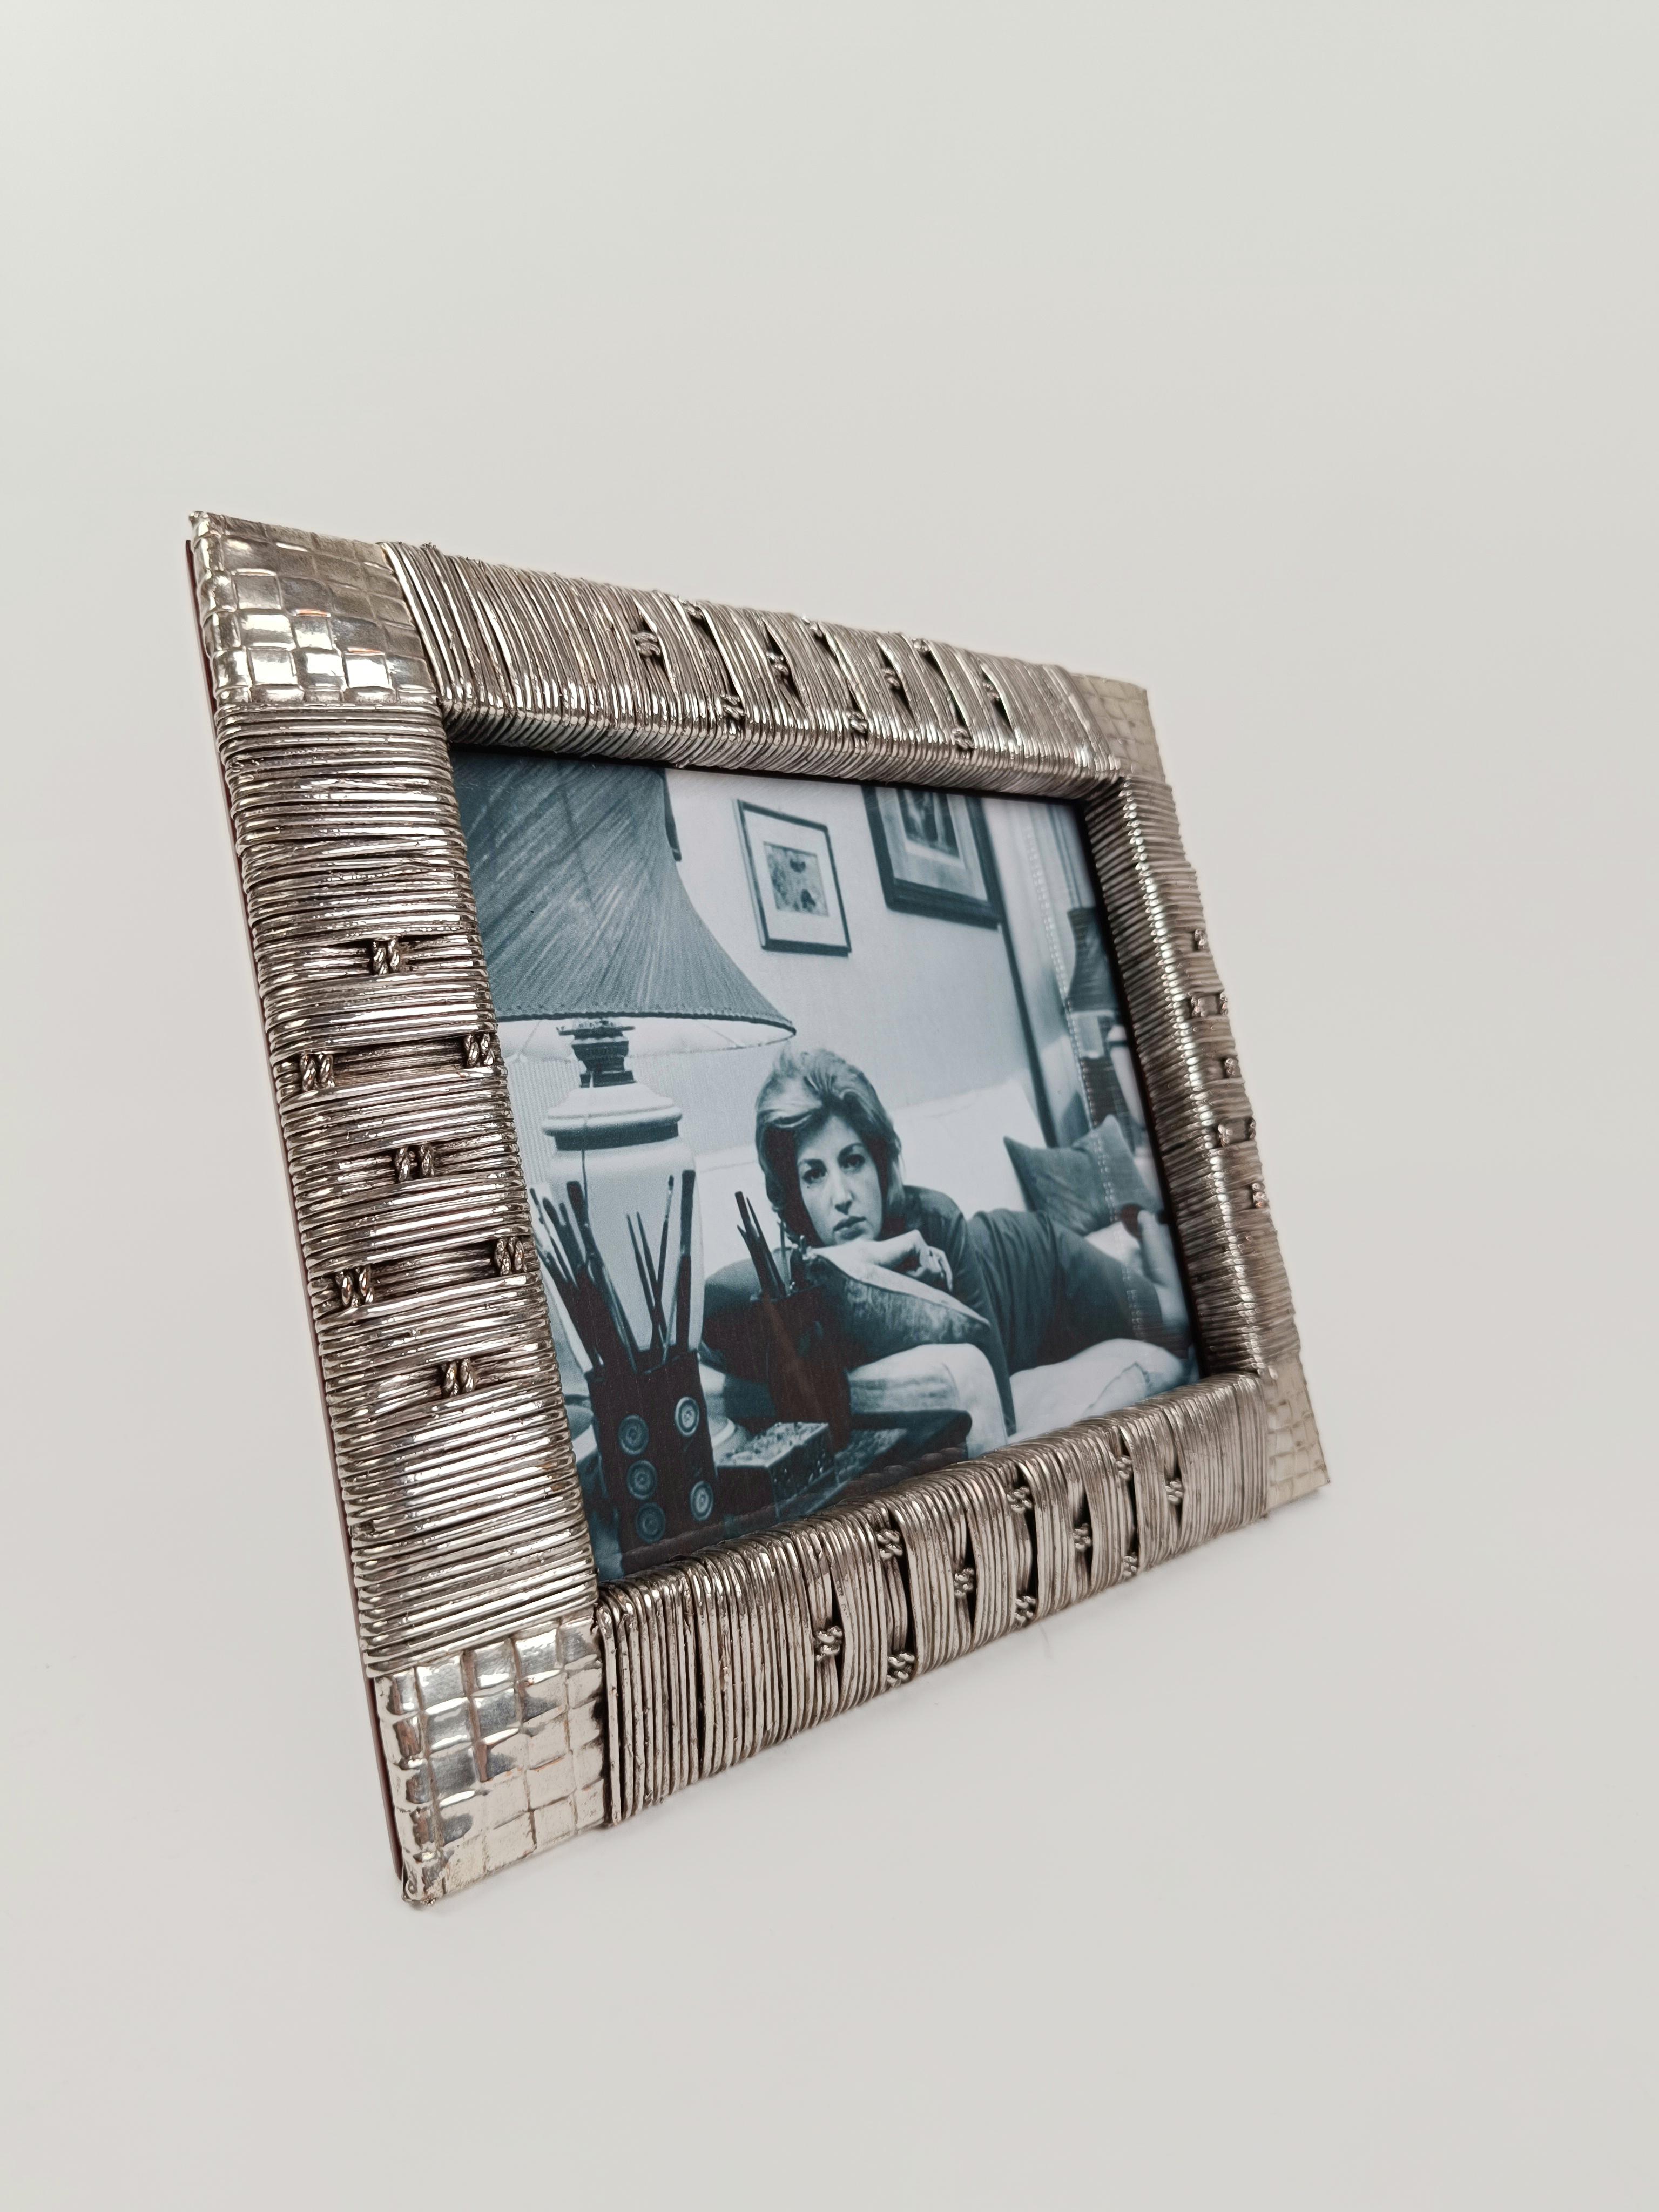 20th Century Midcentury Table Picture Frame Made in Silver Plated Woven Wicker, Italy 1970s For Sale